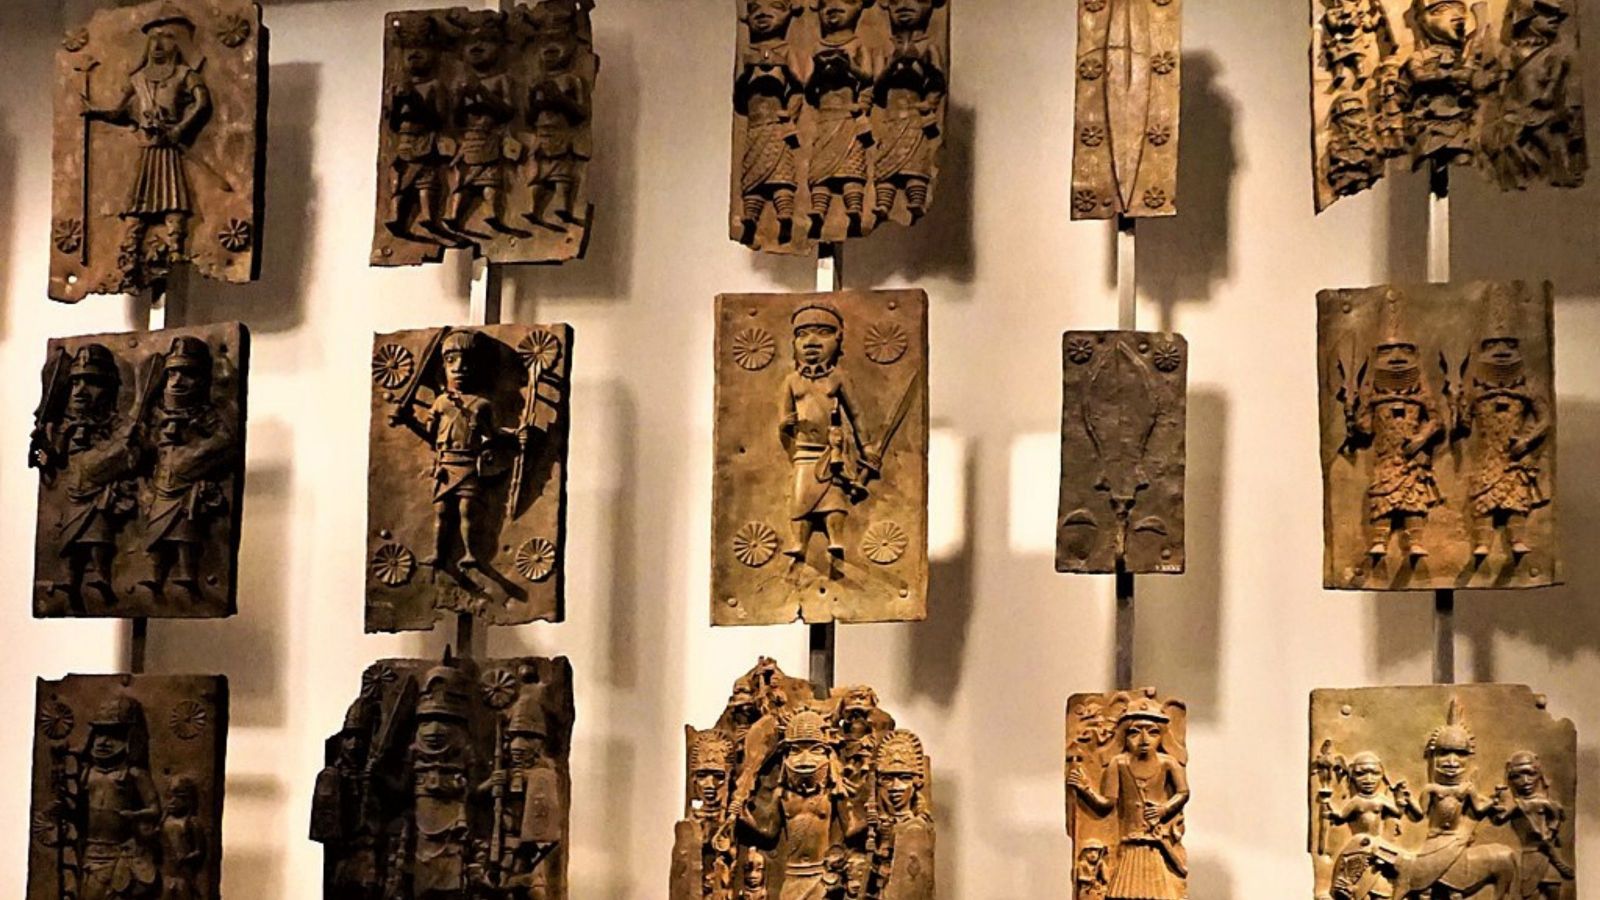 worked relief images in bronze exhibited in a group of 20 hung on a wall in the british museum